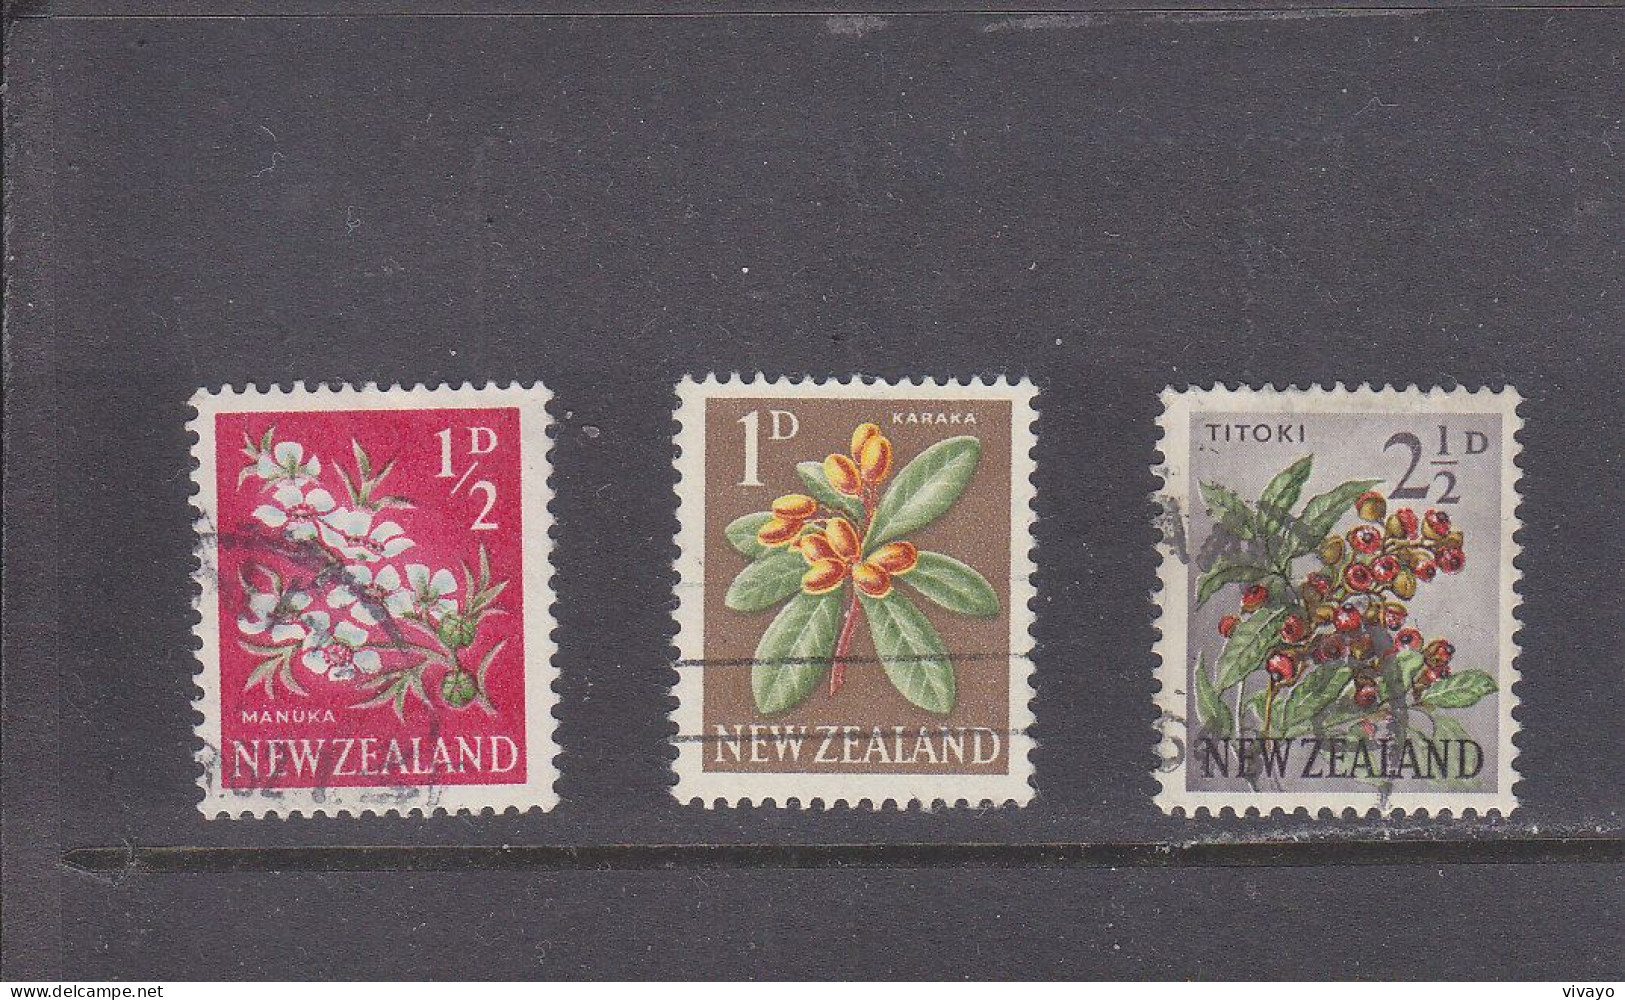 NEW ZEALAND - O / FINE CANCELLED - 1960/1961 - FLOWERS - Mi. 392, 393, 395 - Used Stamps